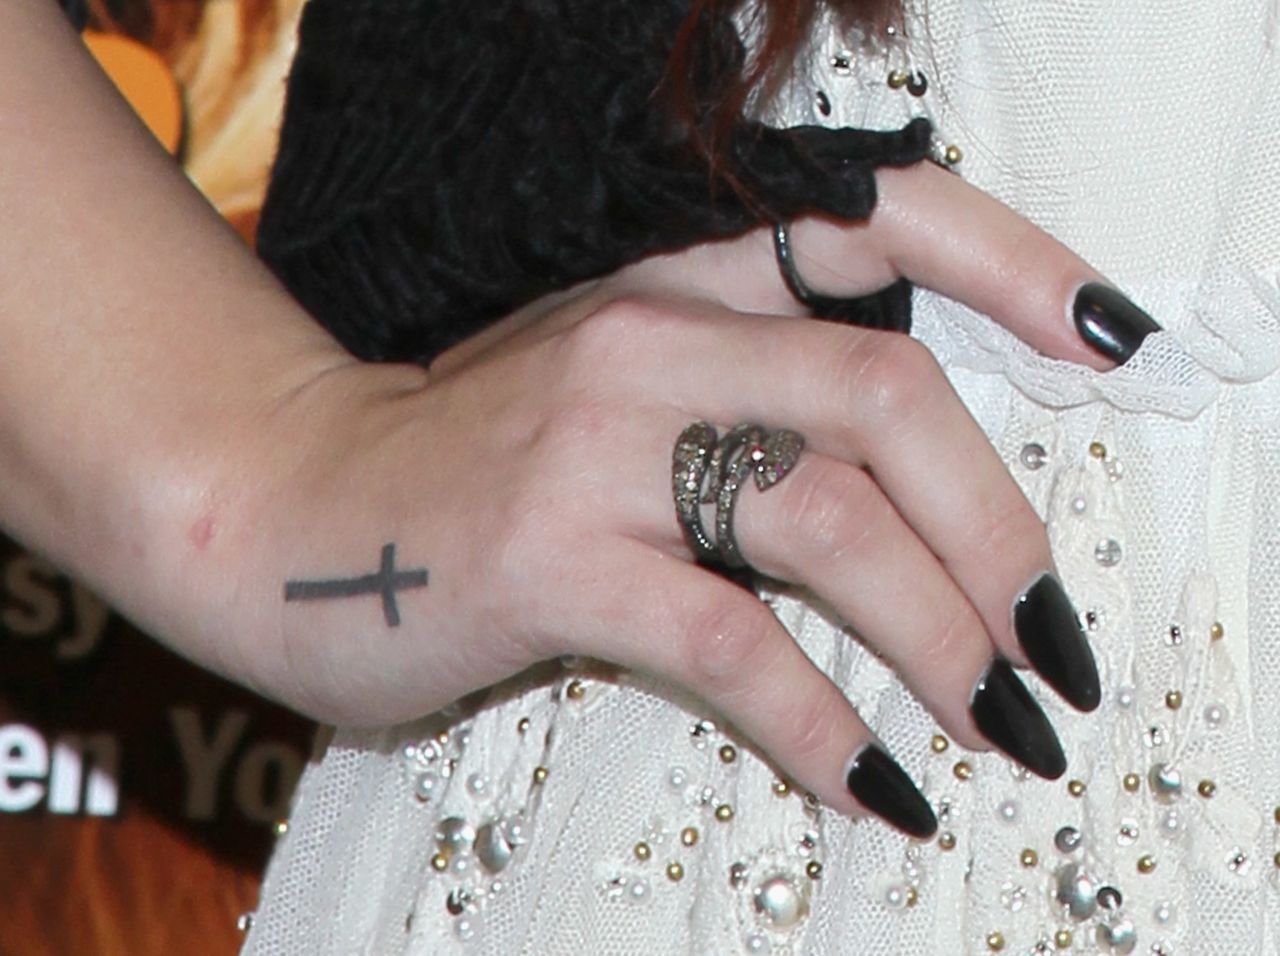 Singer/actress Demi Lovato displays a tattoo of a cross during a book signing.